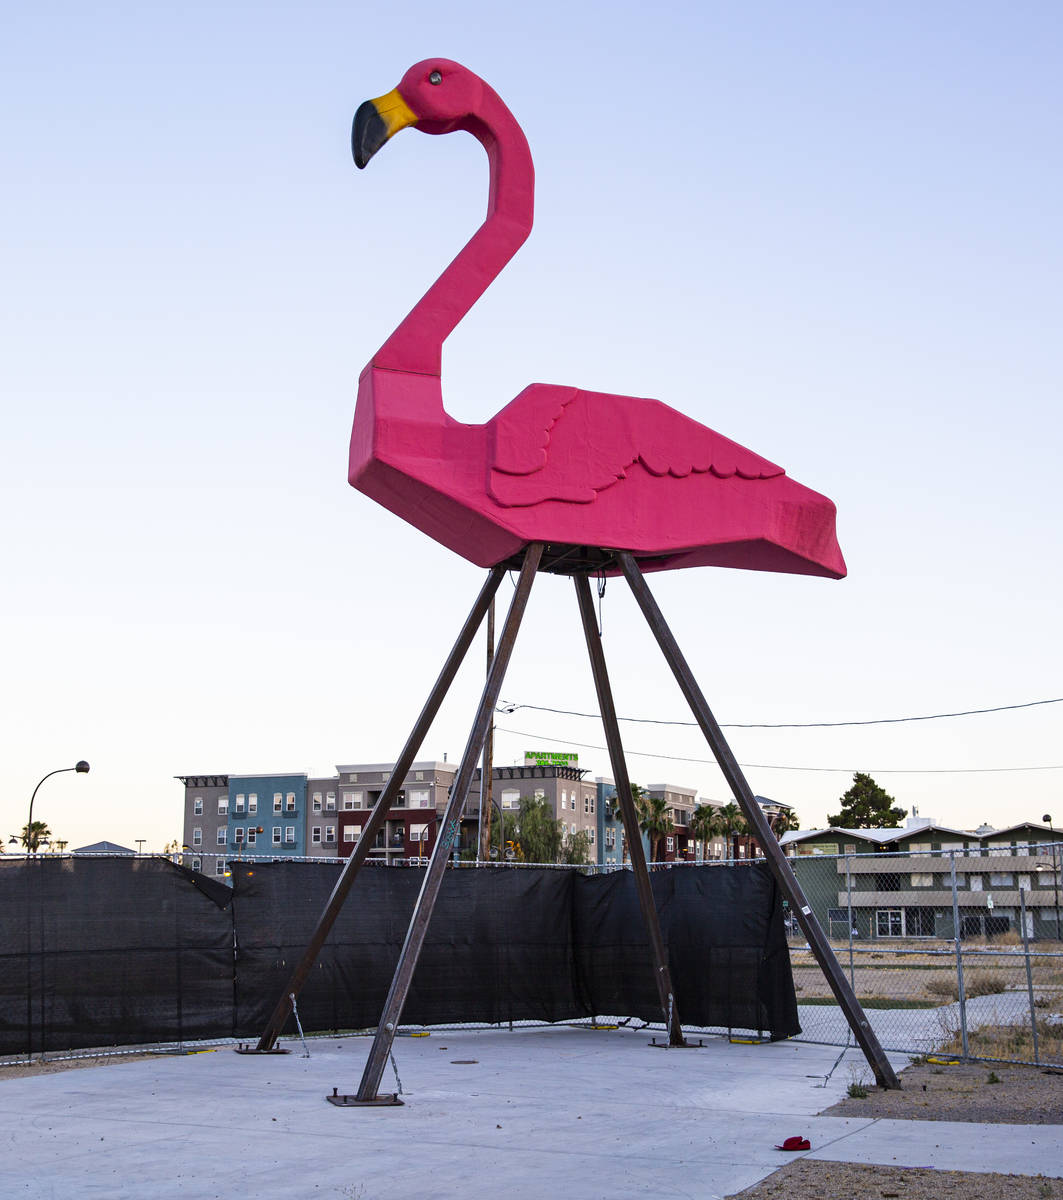 Phoenicopterus Rex, a giant replica of a pink plastic lawn flamingo standing 40 feet tall, in d ...